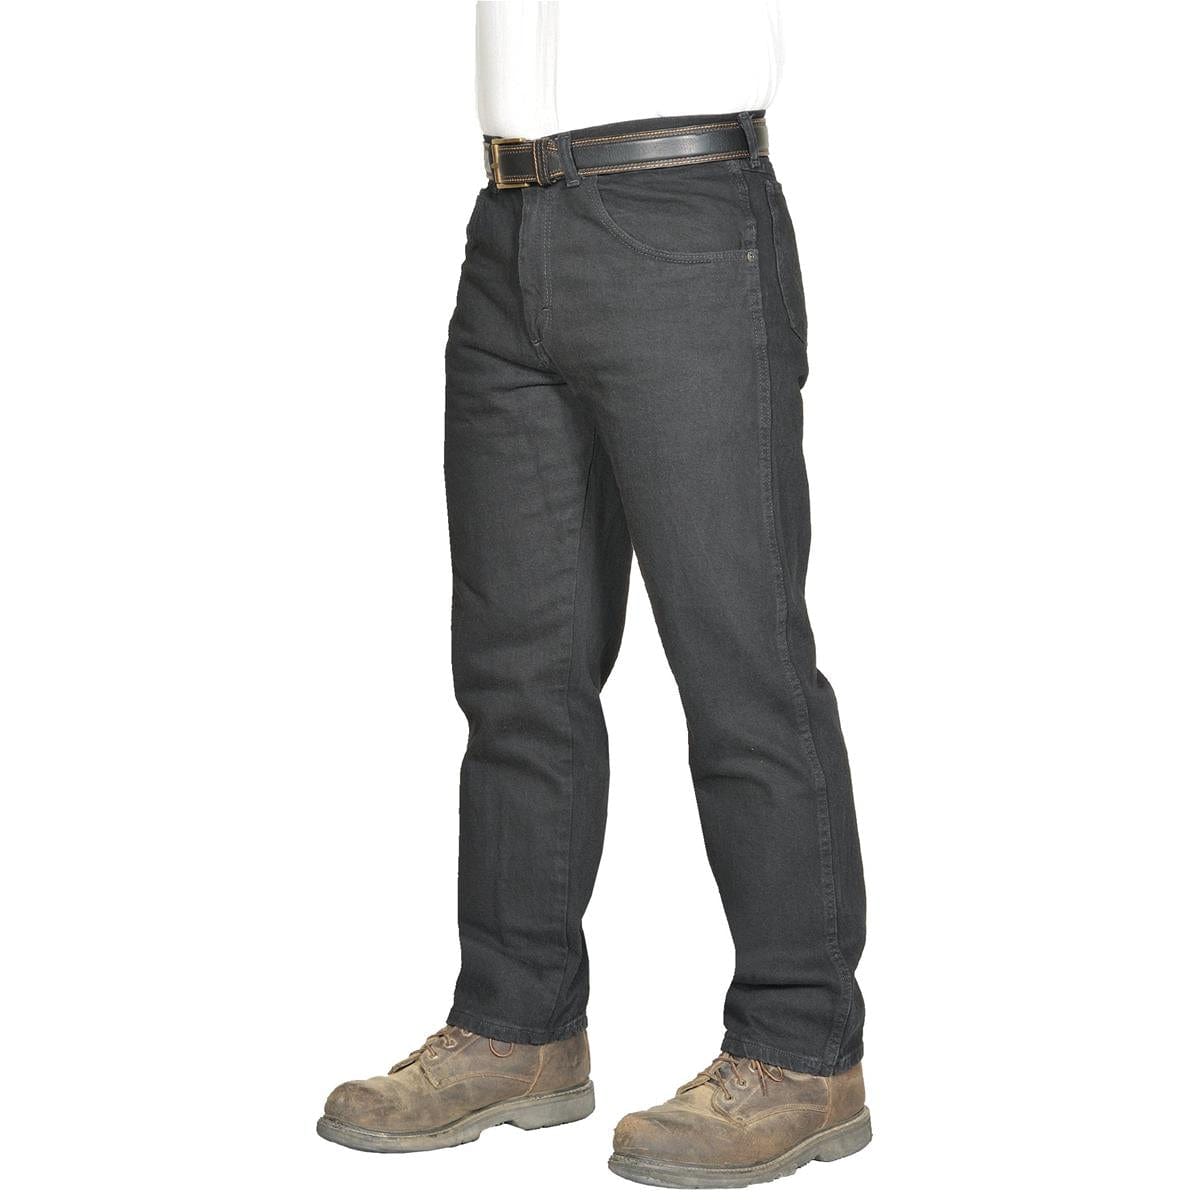 Wrangler Rugged Wear Relaxed-Fit Jeans, Black